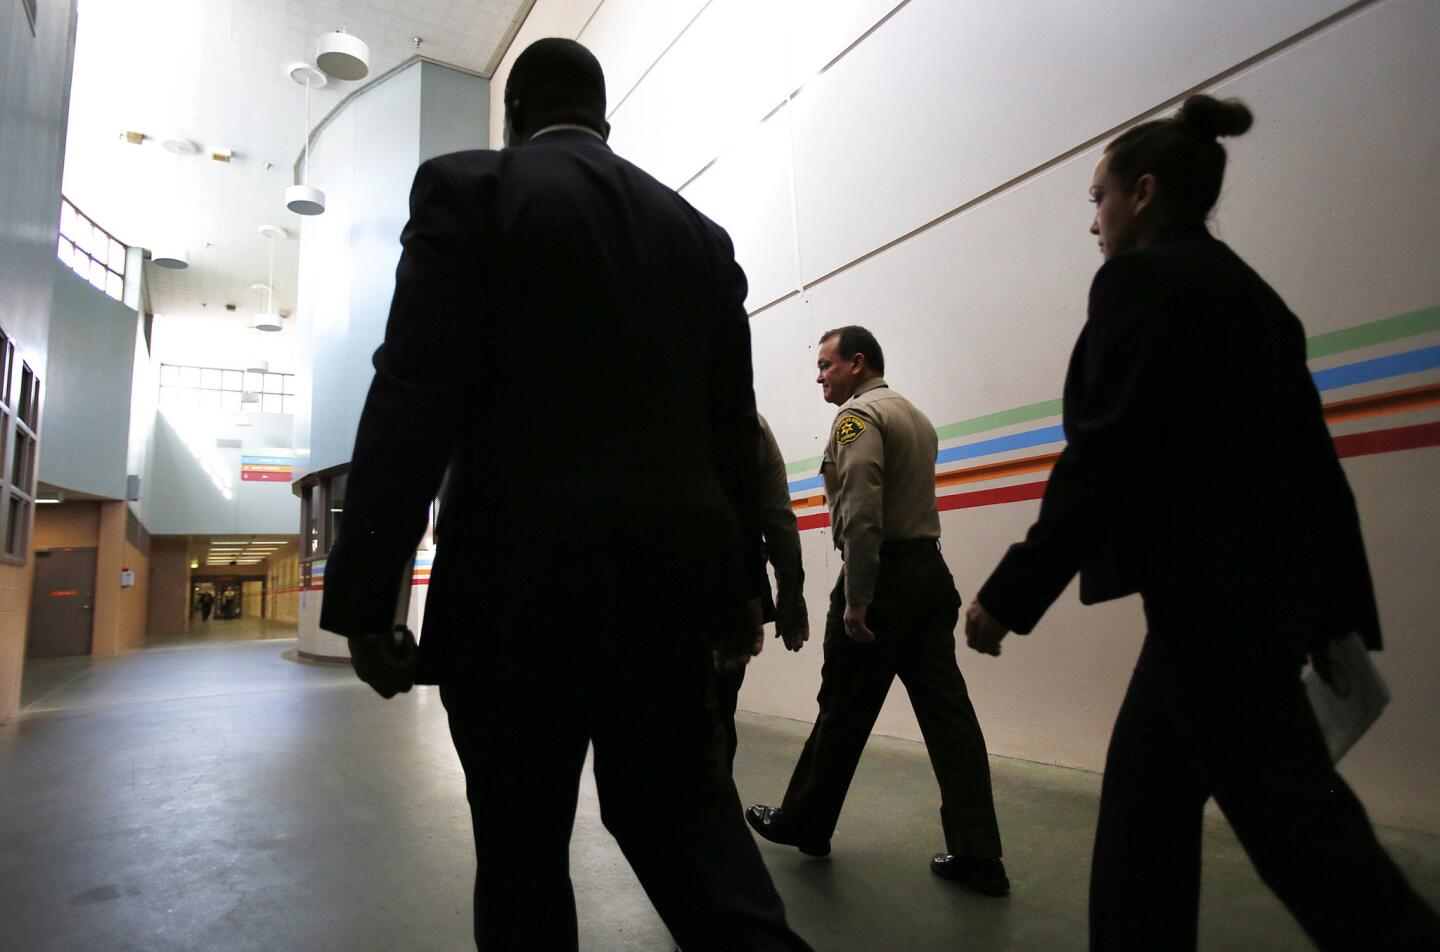 Los Angeles County Sheriff Jim McDonnell is escorted by his drivers Sgt. Clipper Hackett, left, and Deputy Janine Hanson, right, at the North County Correctional Facility in Castaic.